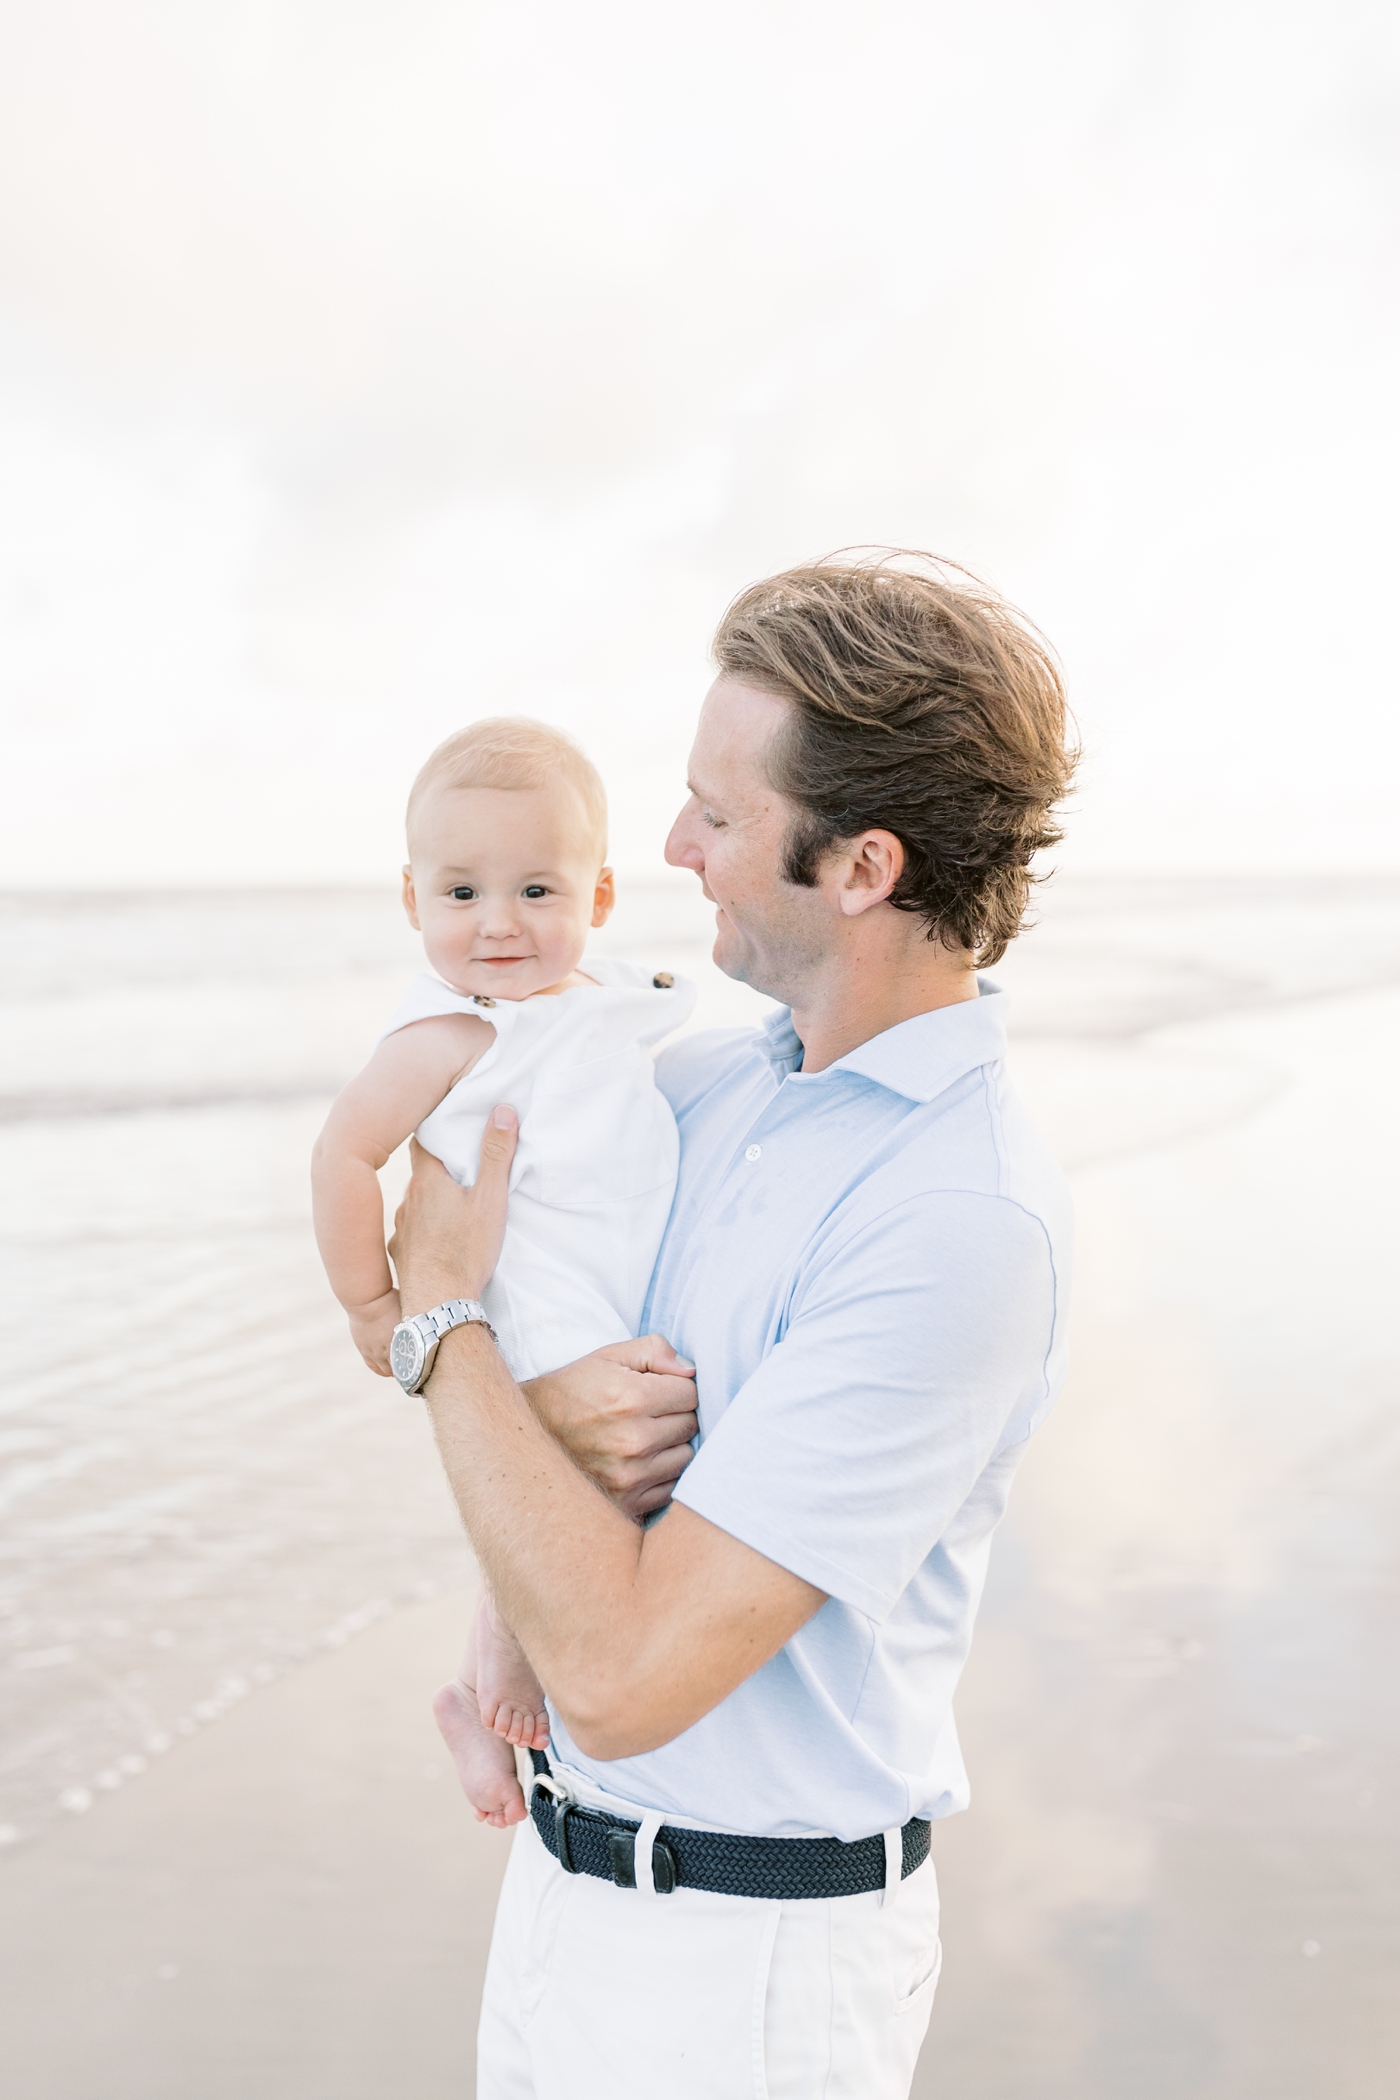 Dad holding baby boy on the beach | Photo by Caitlyn Motycka Photography.